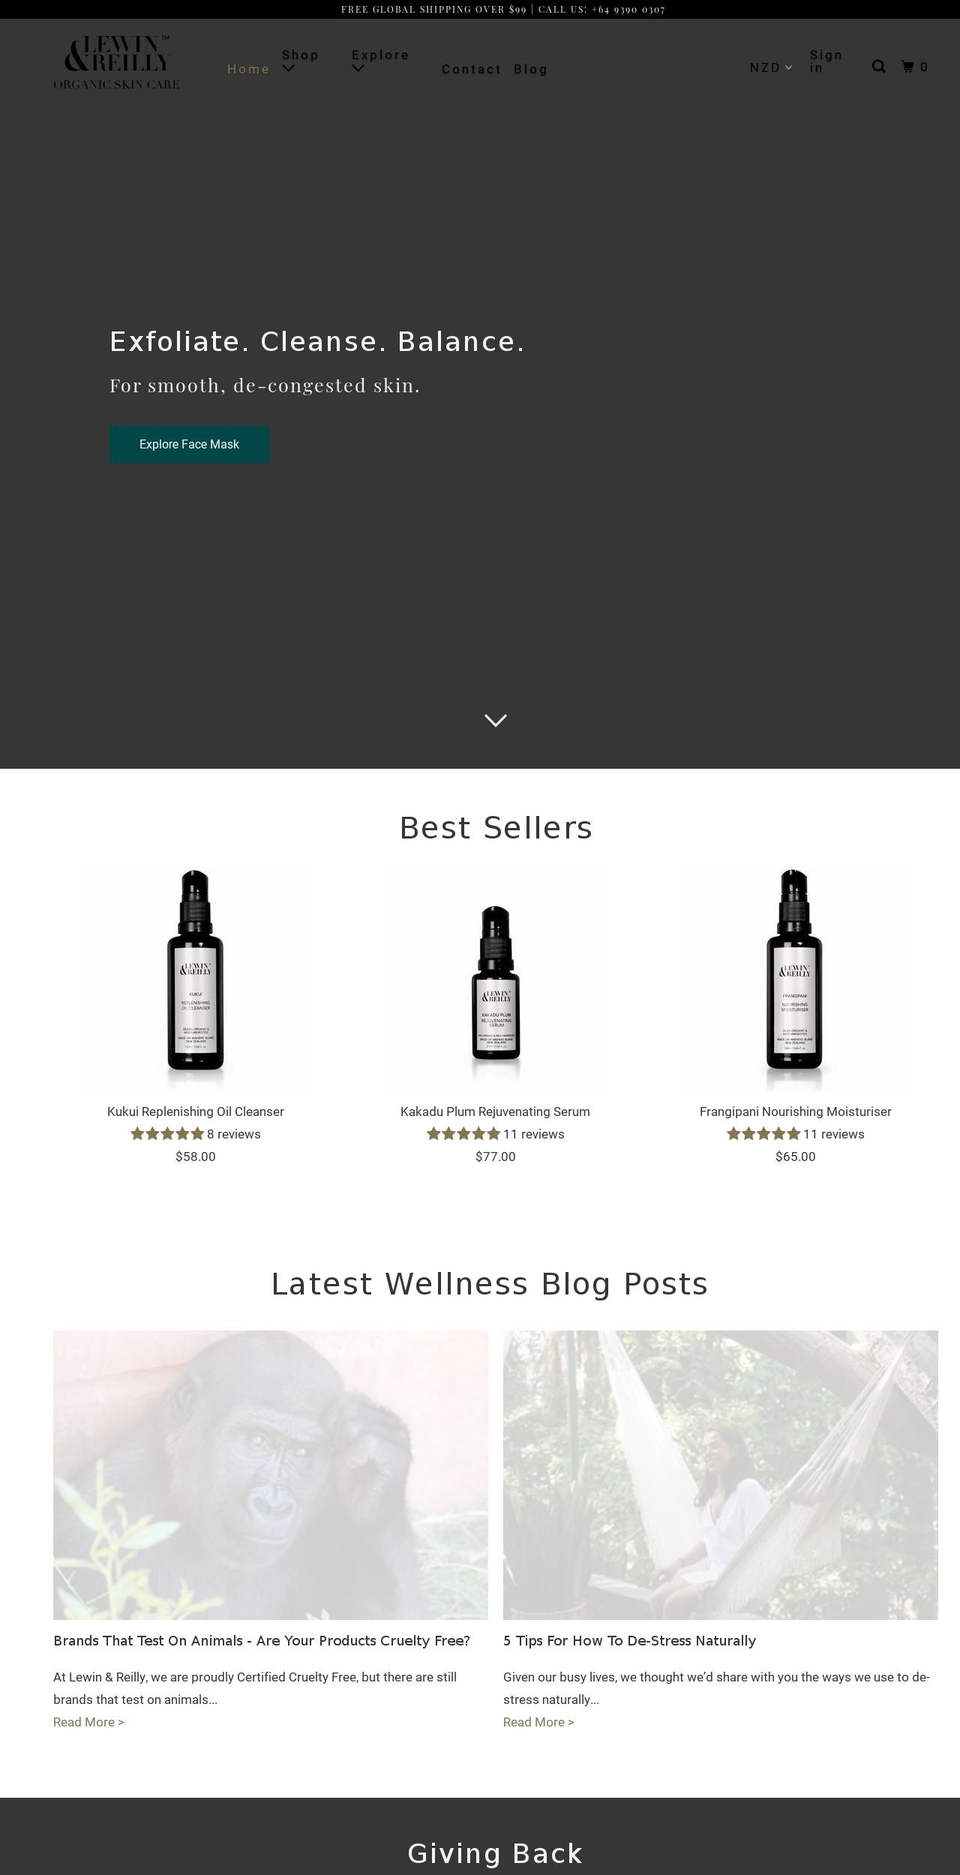 OOTS Support Shopify theme site example lewinandreilly.com